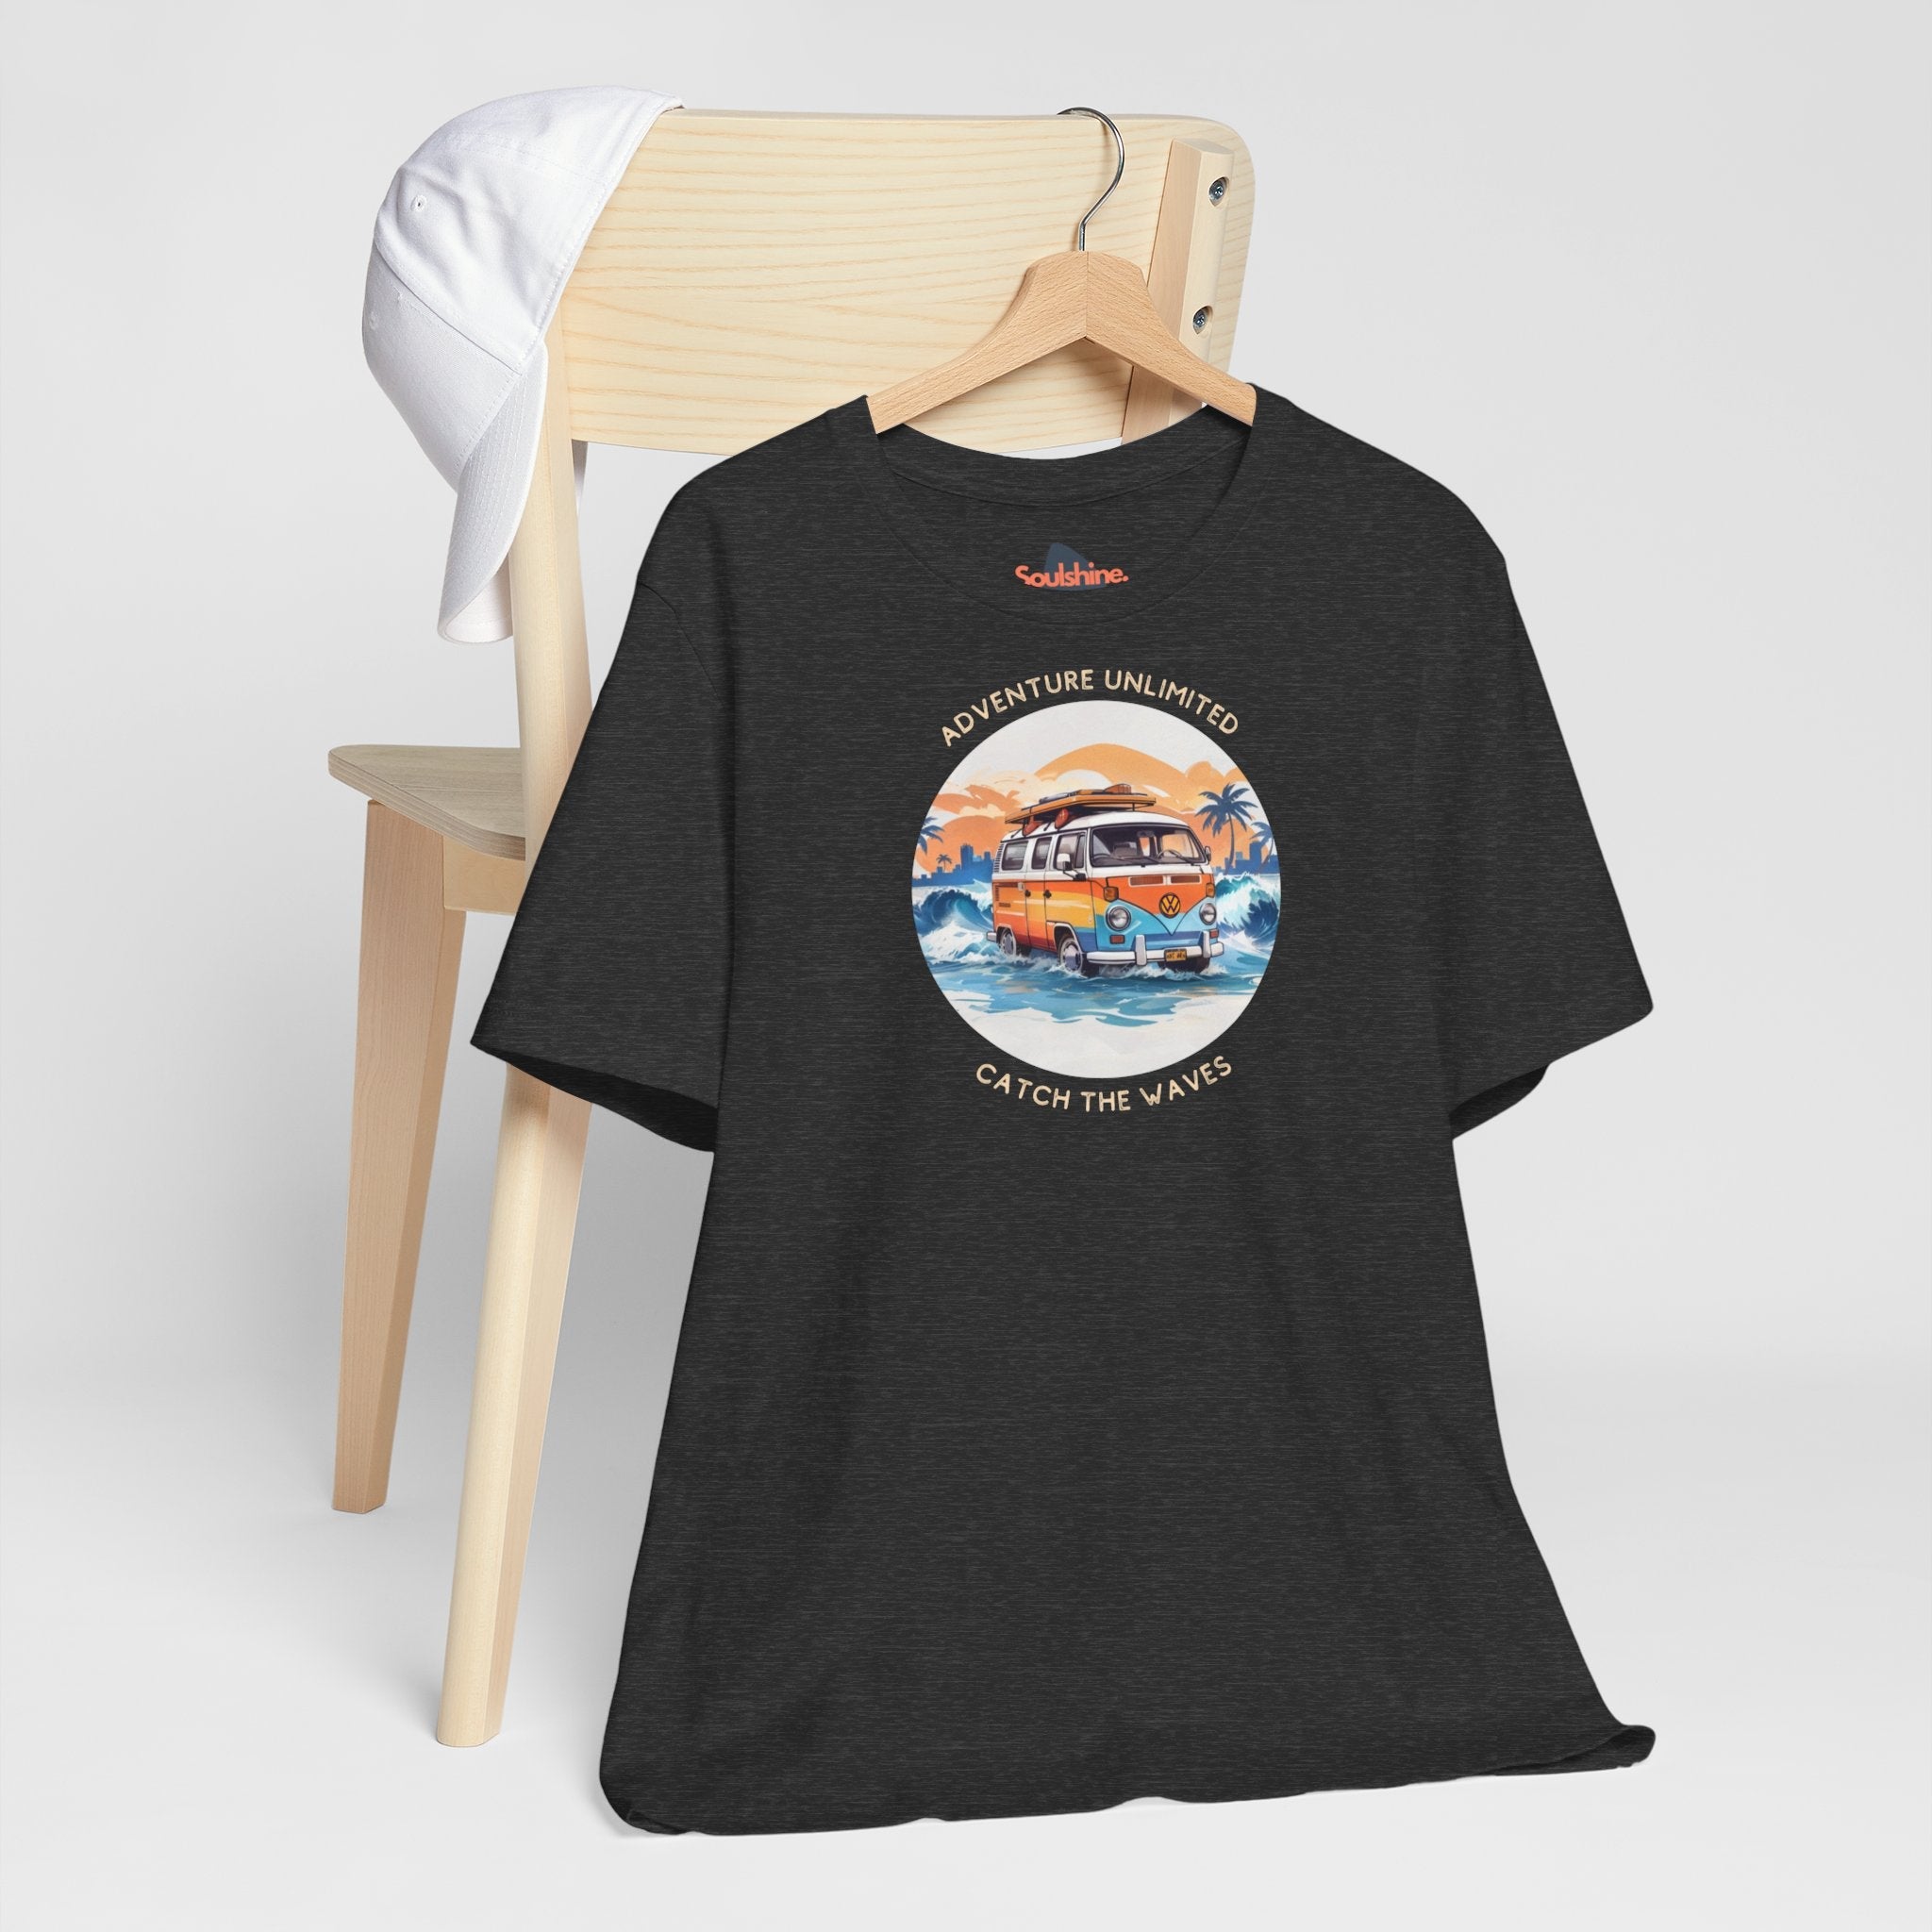 Adventure Unlimited Surfing T-Shirt featuring a van and sunset graphic printed on a black Bella & Canvas EU item